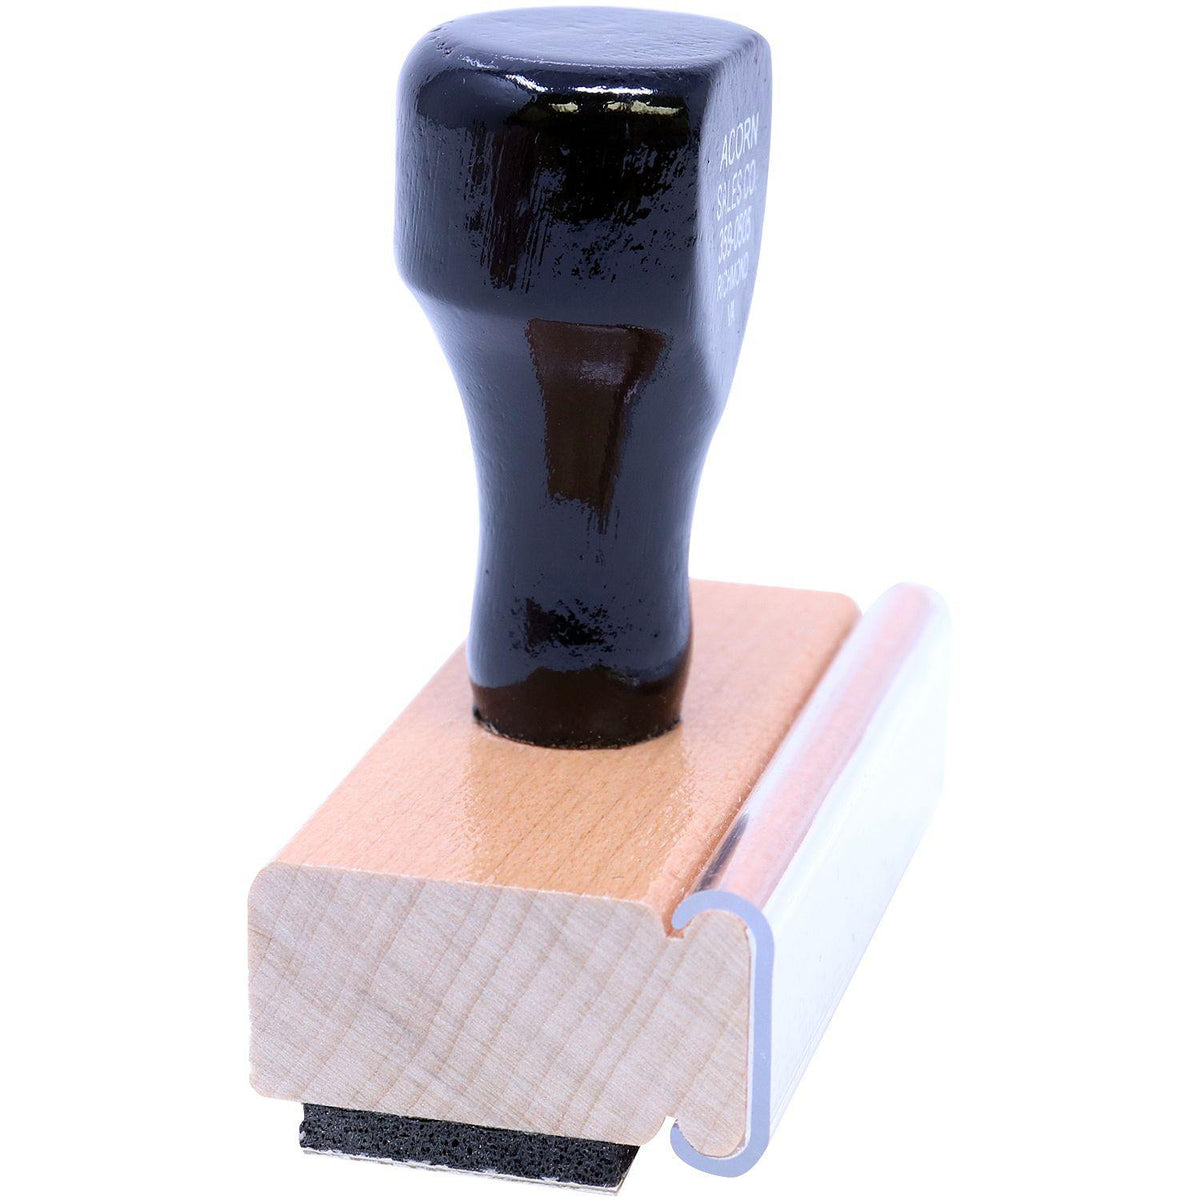 Large Times First Class Mail Rubber Stamp - Engineer Seal Stamps - Brand_Acorn, Impression Size_Large, Stamp Type_Regular Stamp, Type of Use_Postal &amp; Mailing